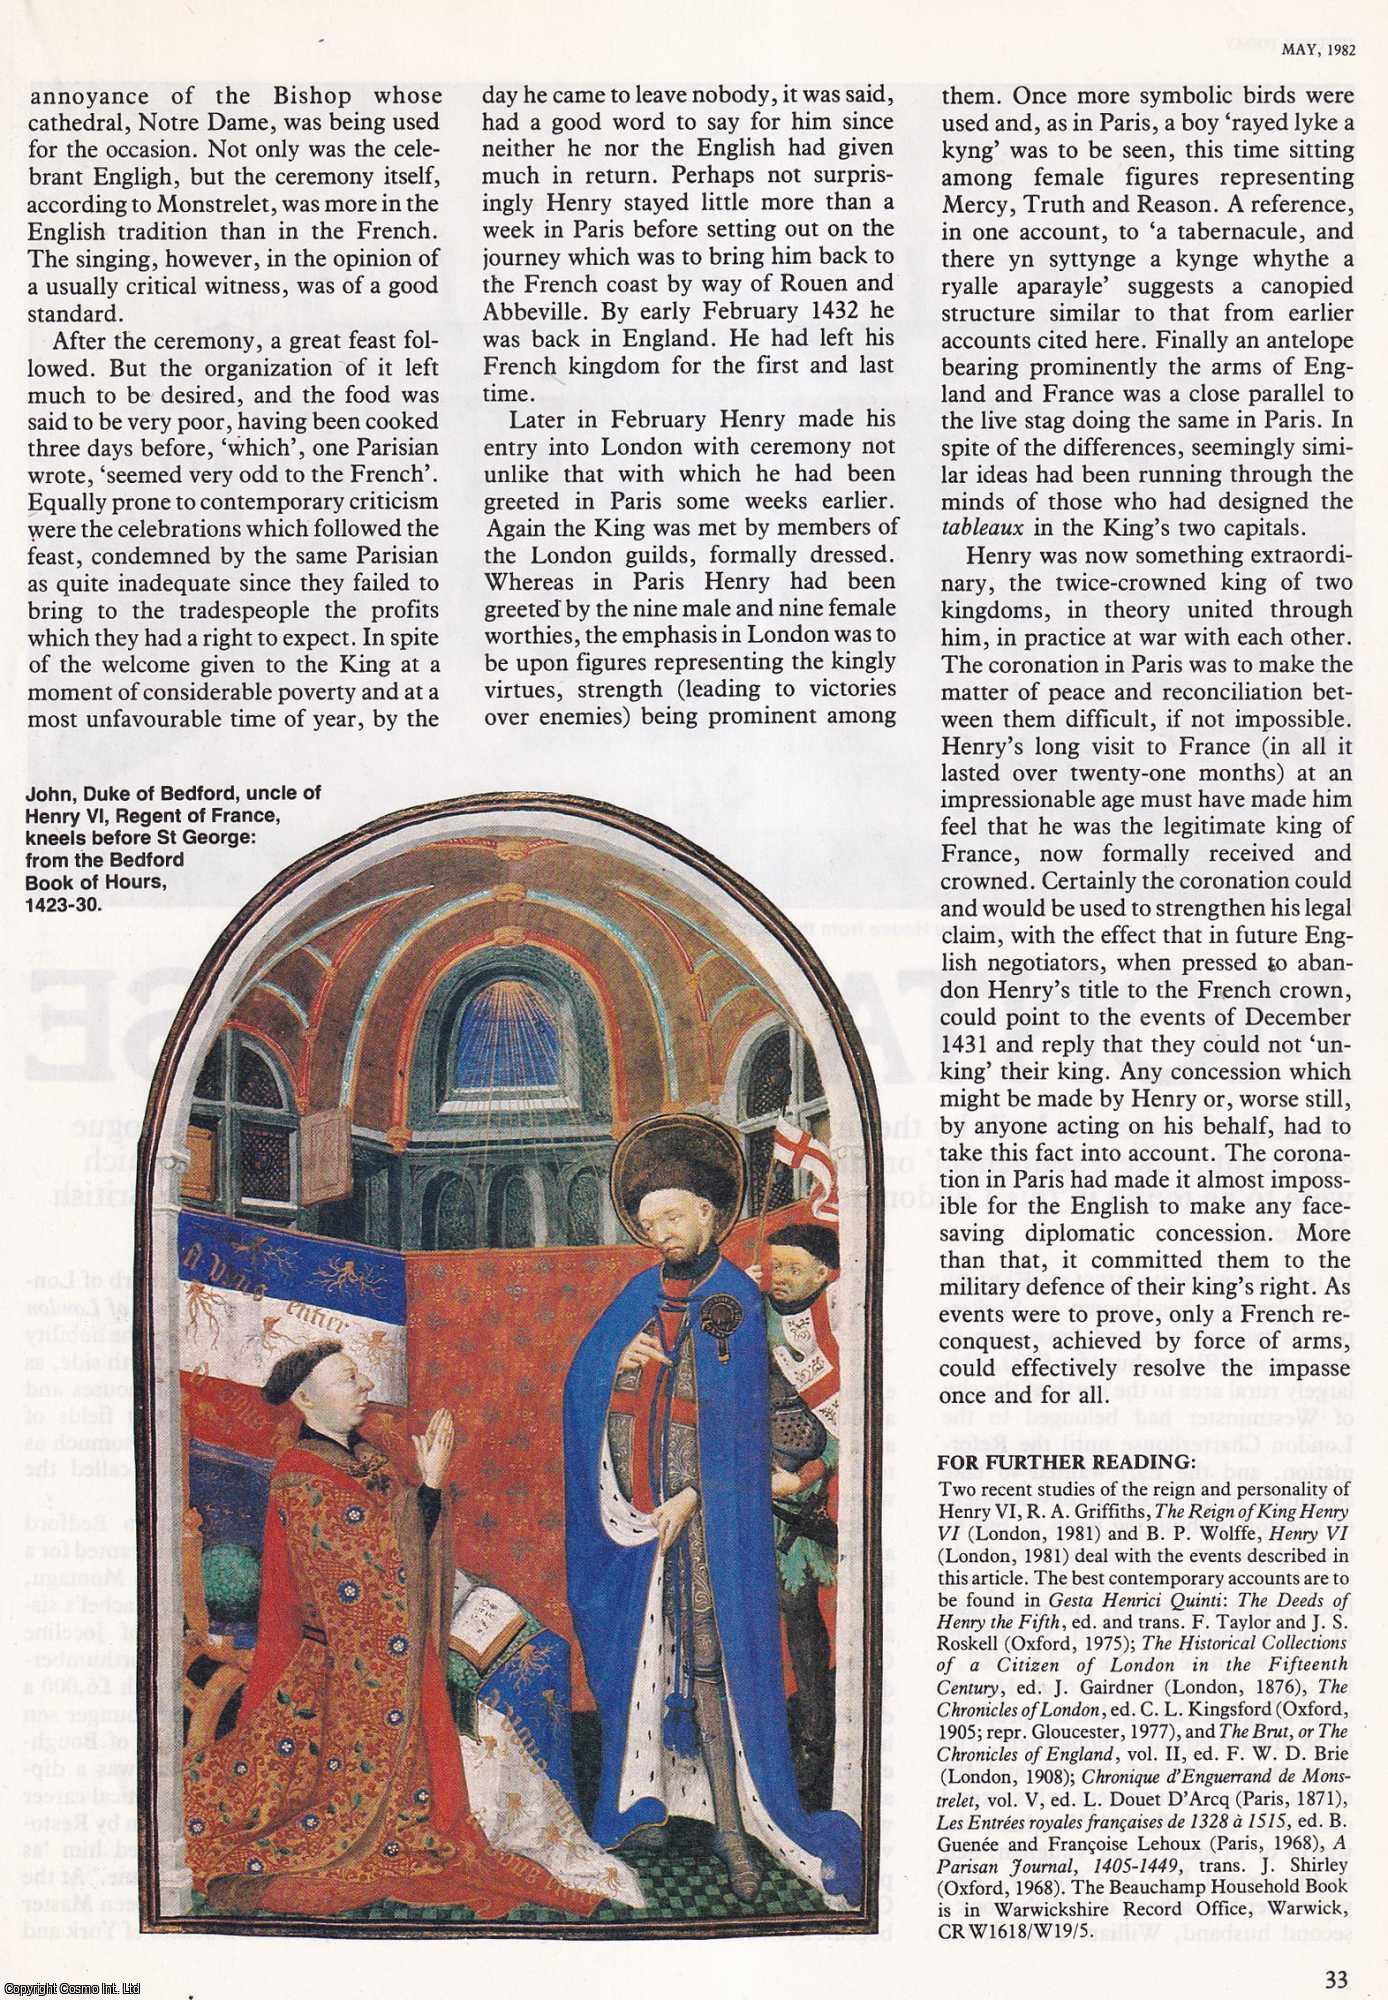 Dorothy Styles & C.T. Allmand - The Coronations of Henry VI. An original article from History Today 1982.